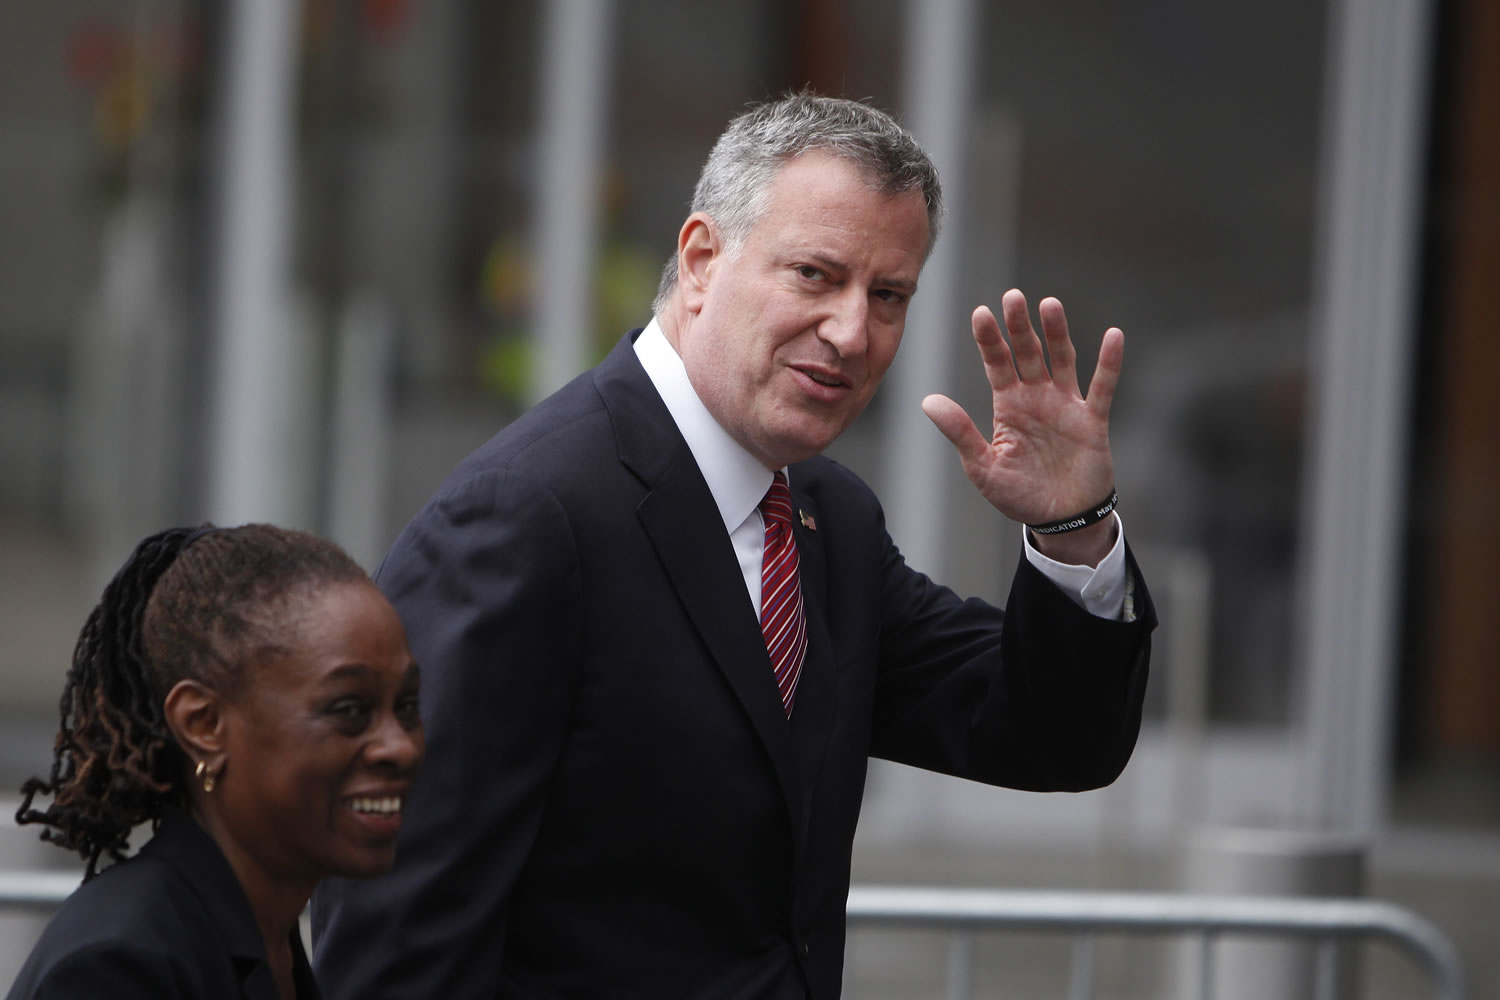 New York City Mayor Bill de Blasio waves to onlookers as he and his wife, Chirlane McCray, depart following a ceremony dedicating the National September 11 Memorial Museum on May 15 in New York.